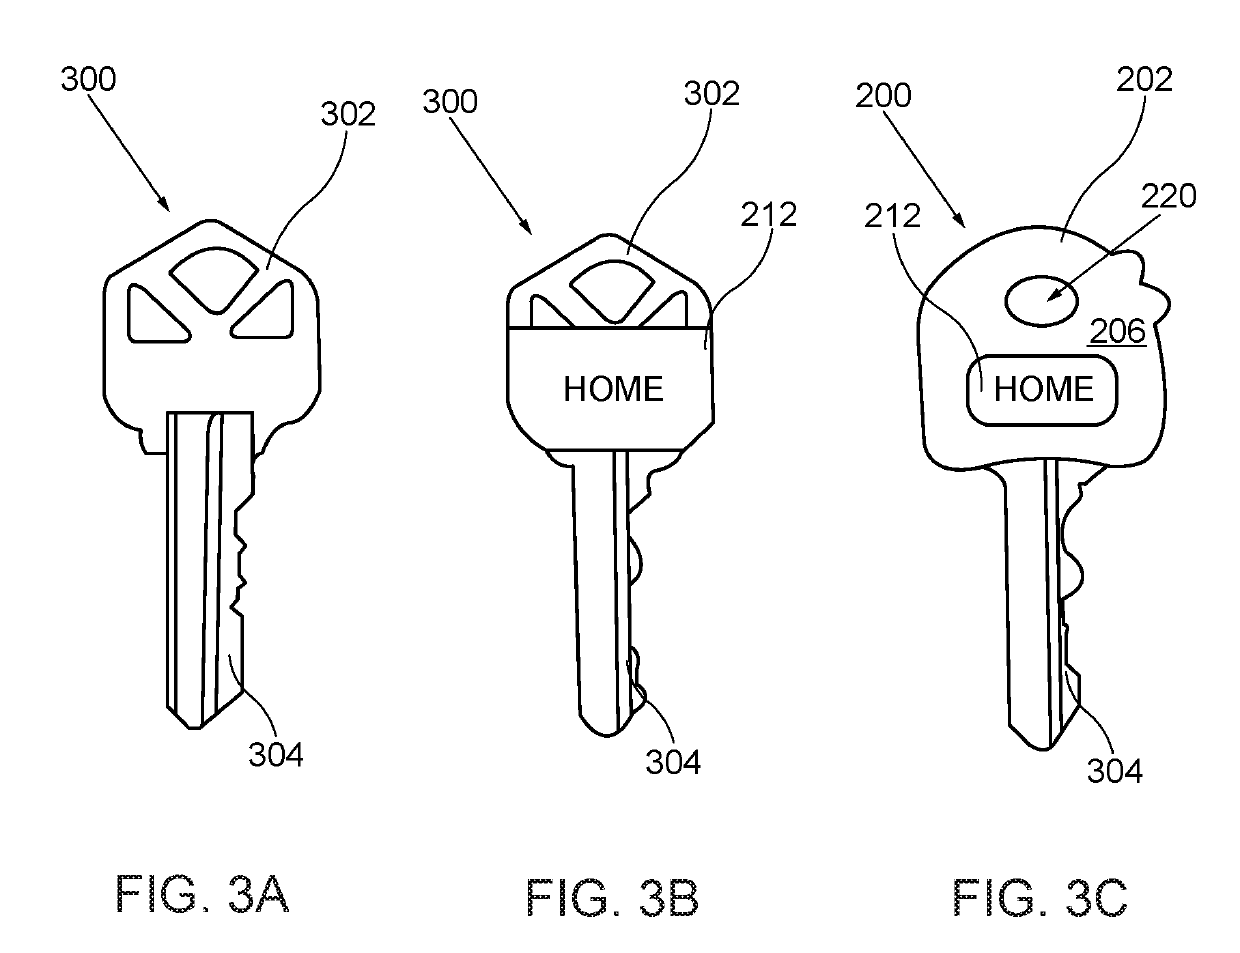 Key Labeling System and Method of Promotional Advertising through Distribution of Labeled Key Head Covers